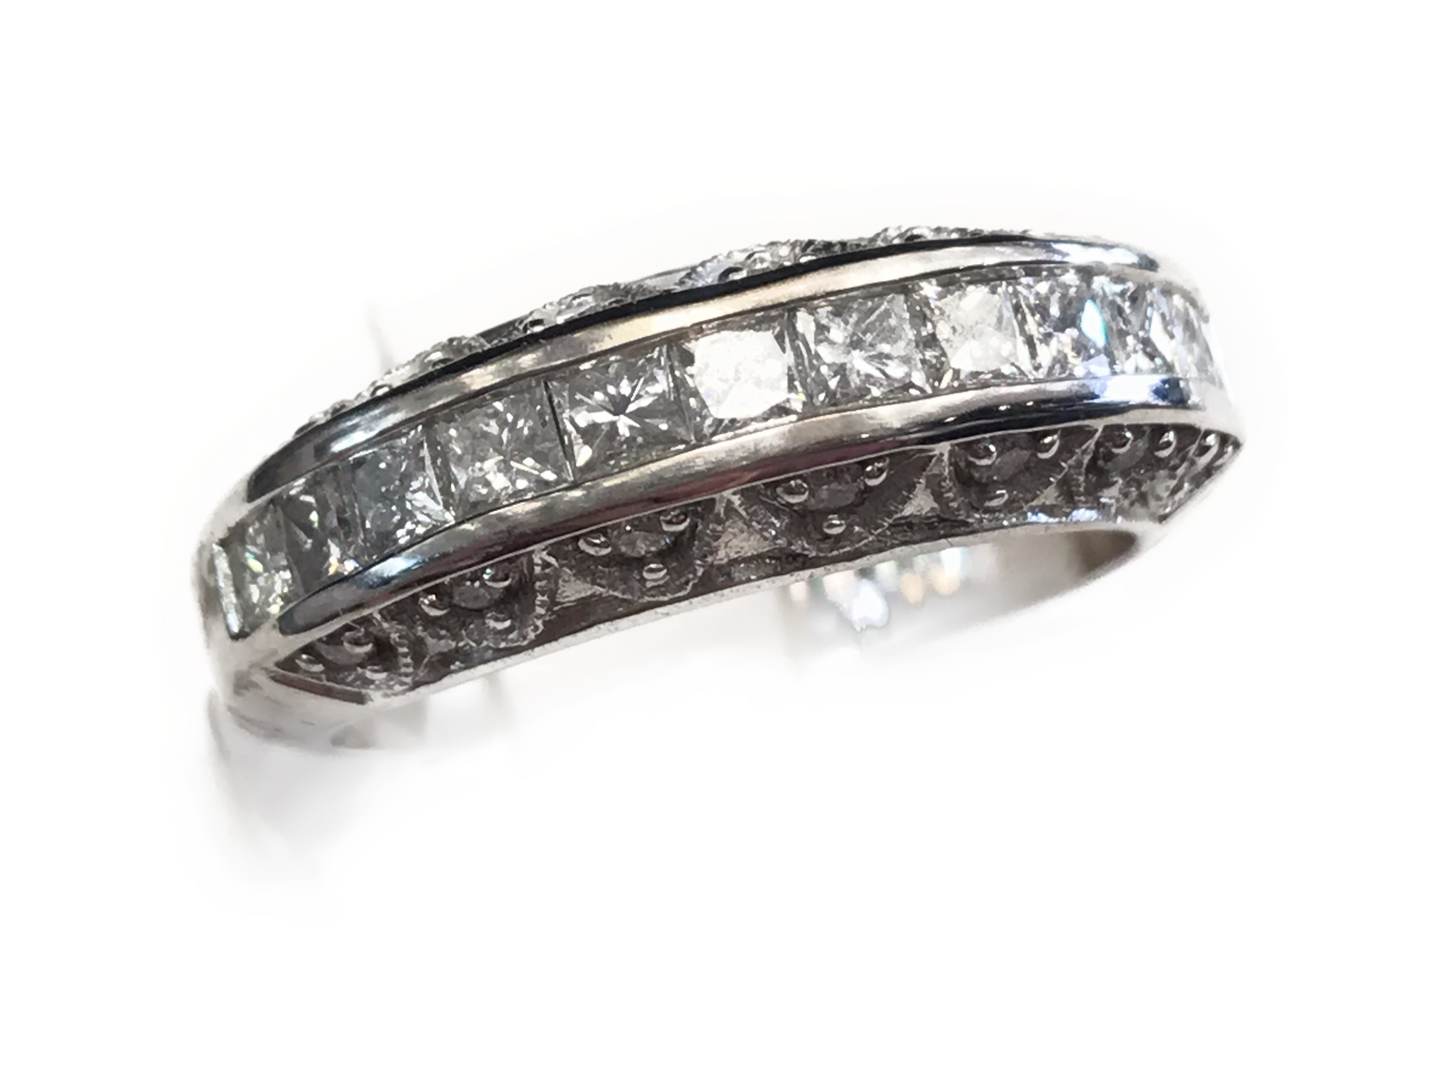 14Kt White Gold and Diamond Band -4067